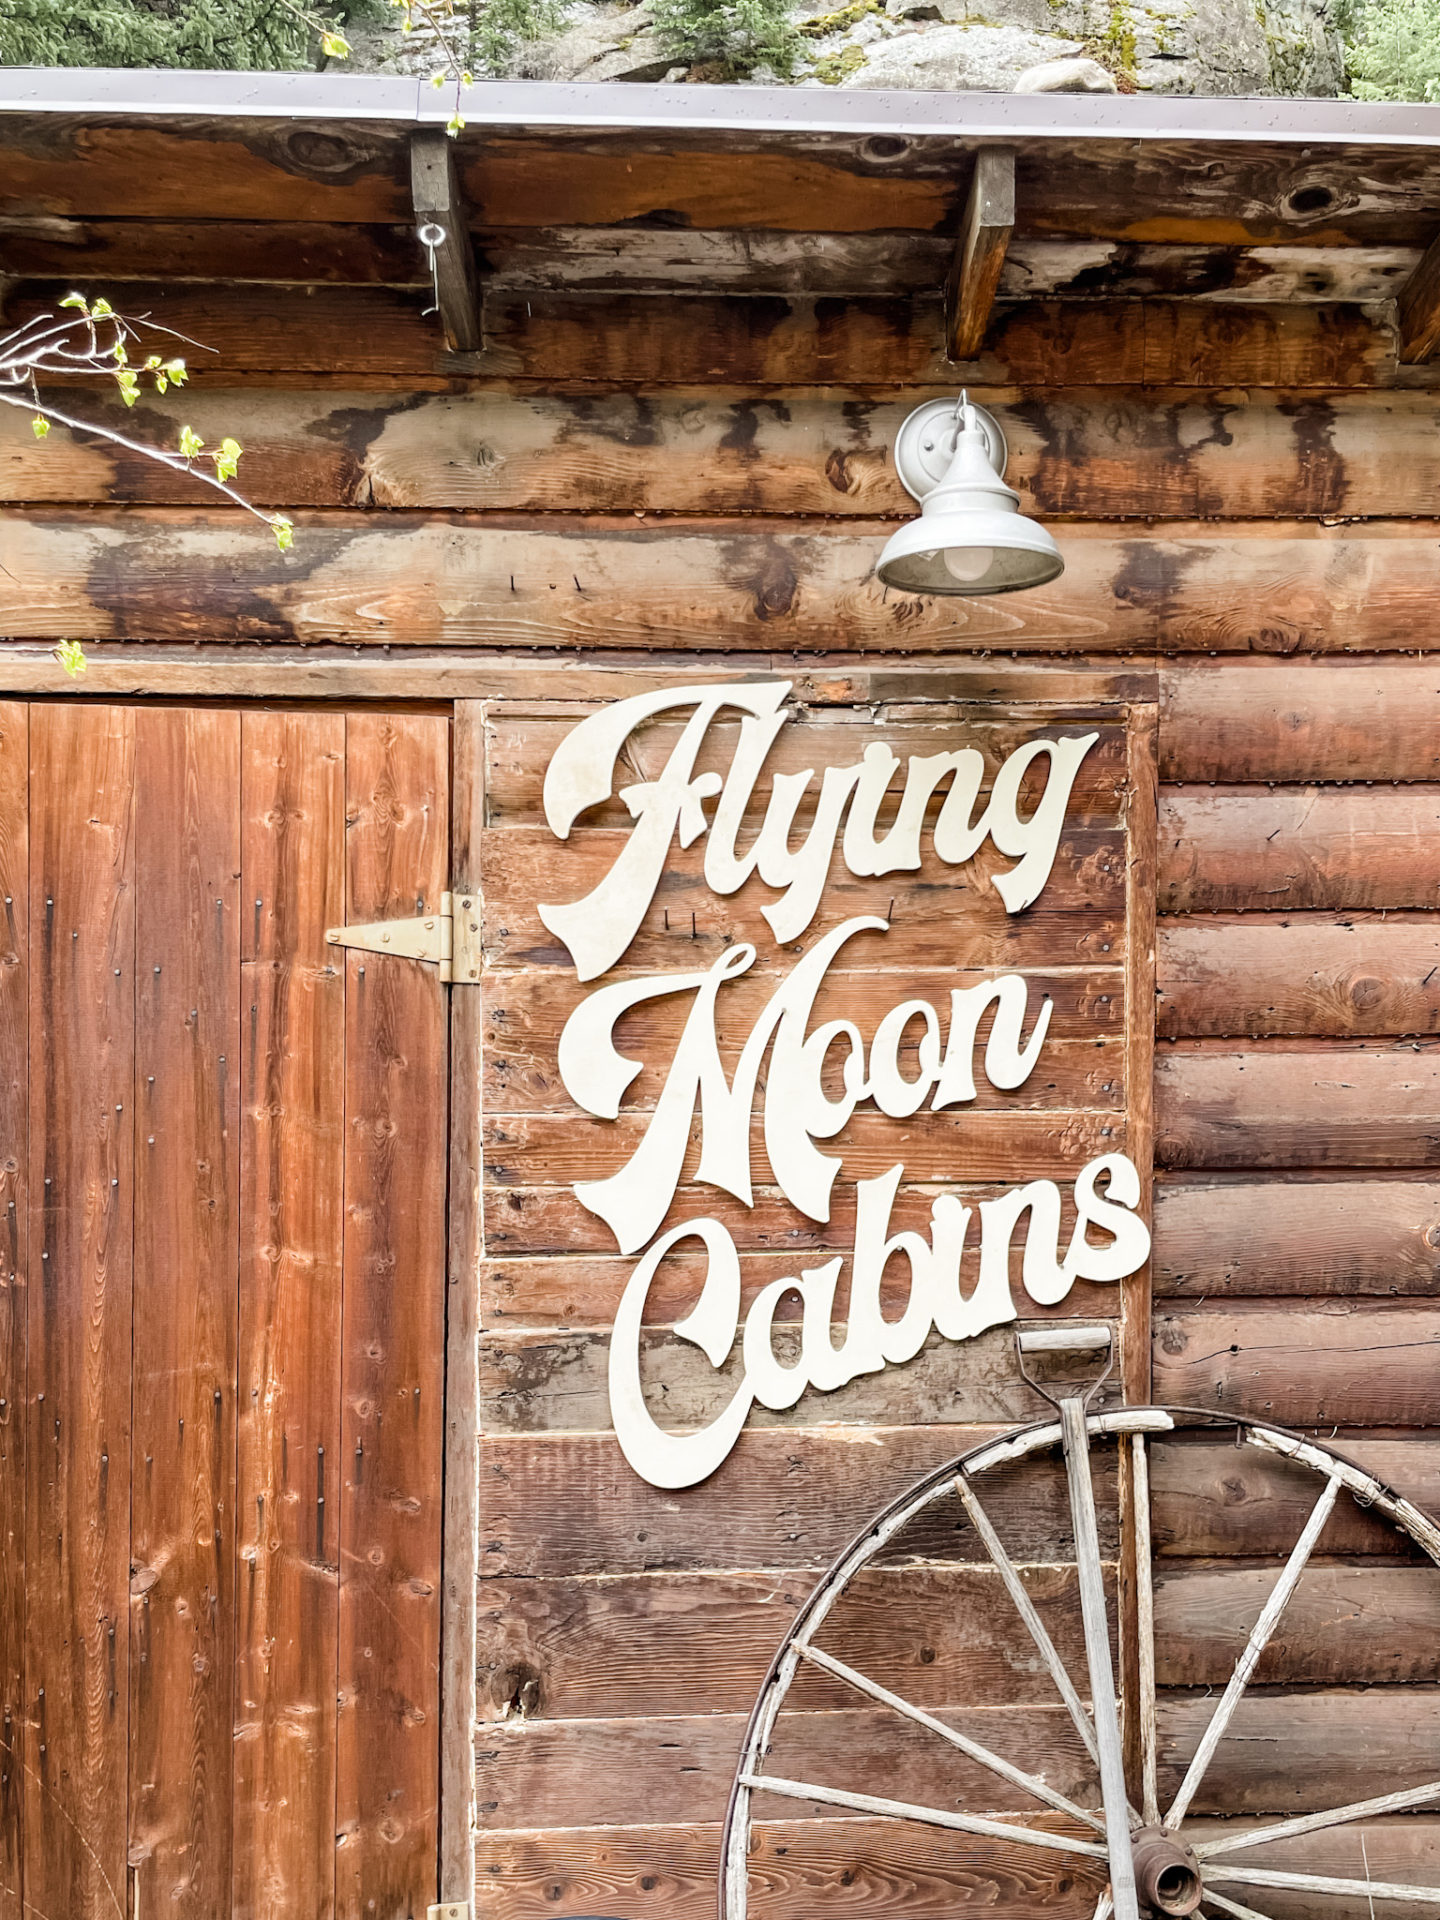 Staying at the Flying Moon Cabins Near Idaho Springs